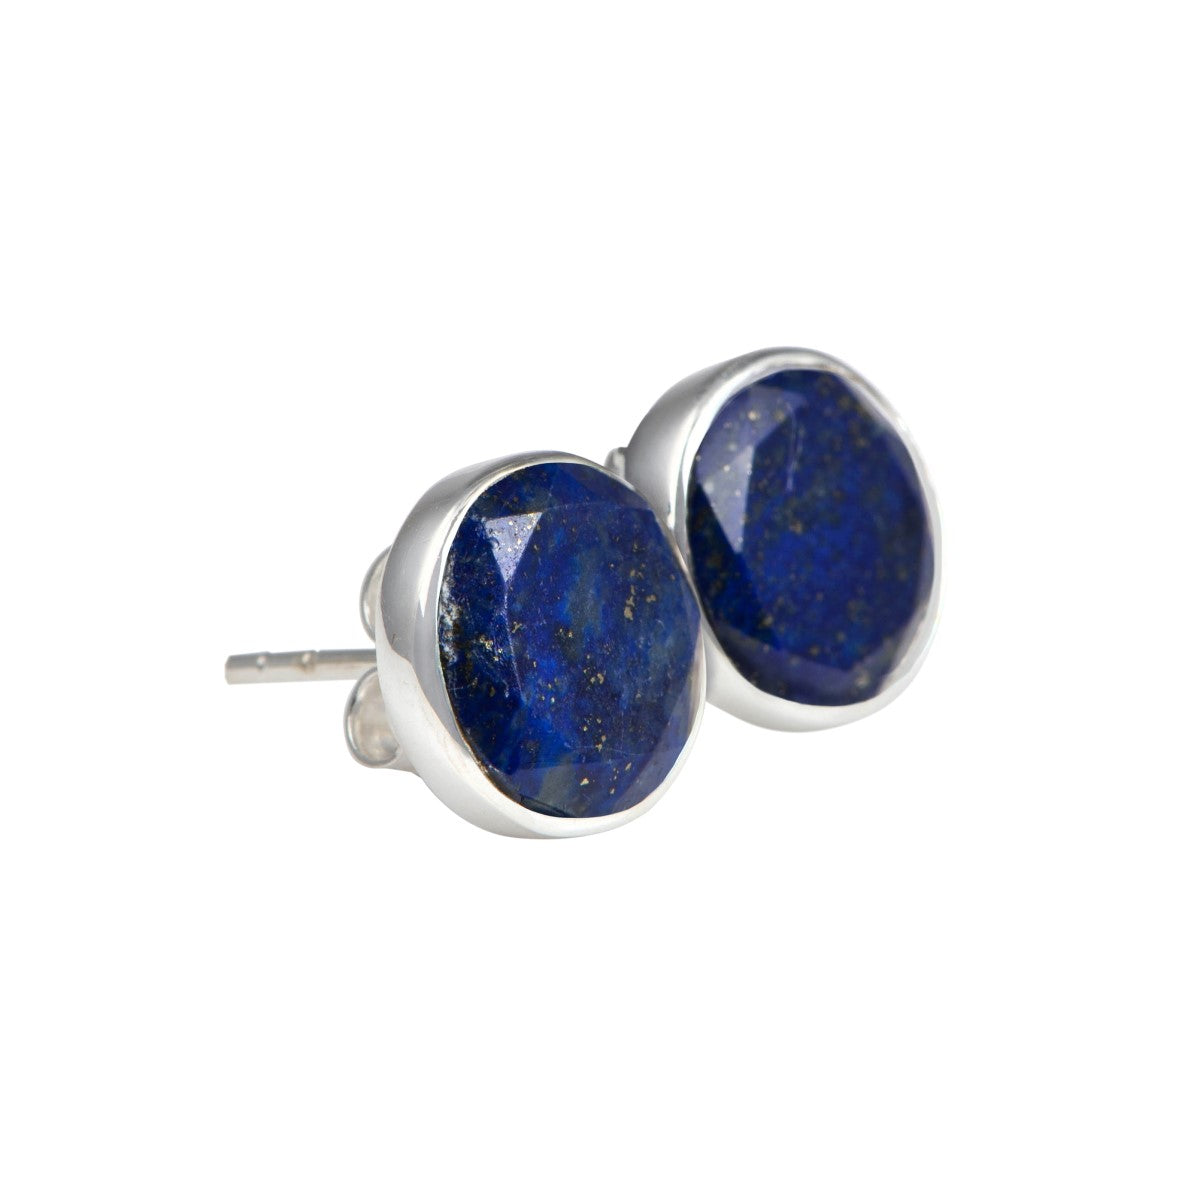 Lapis Lazuli Studs in Sterling Silver with a Round Faceted Gemstone